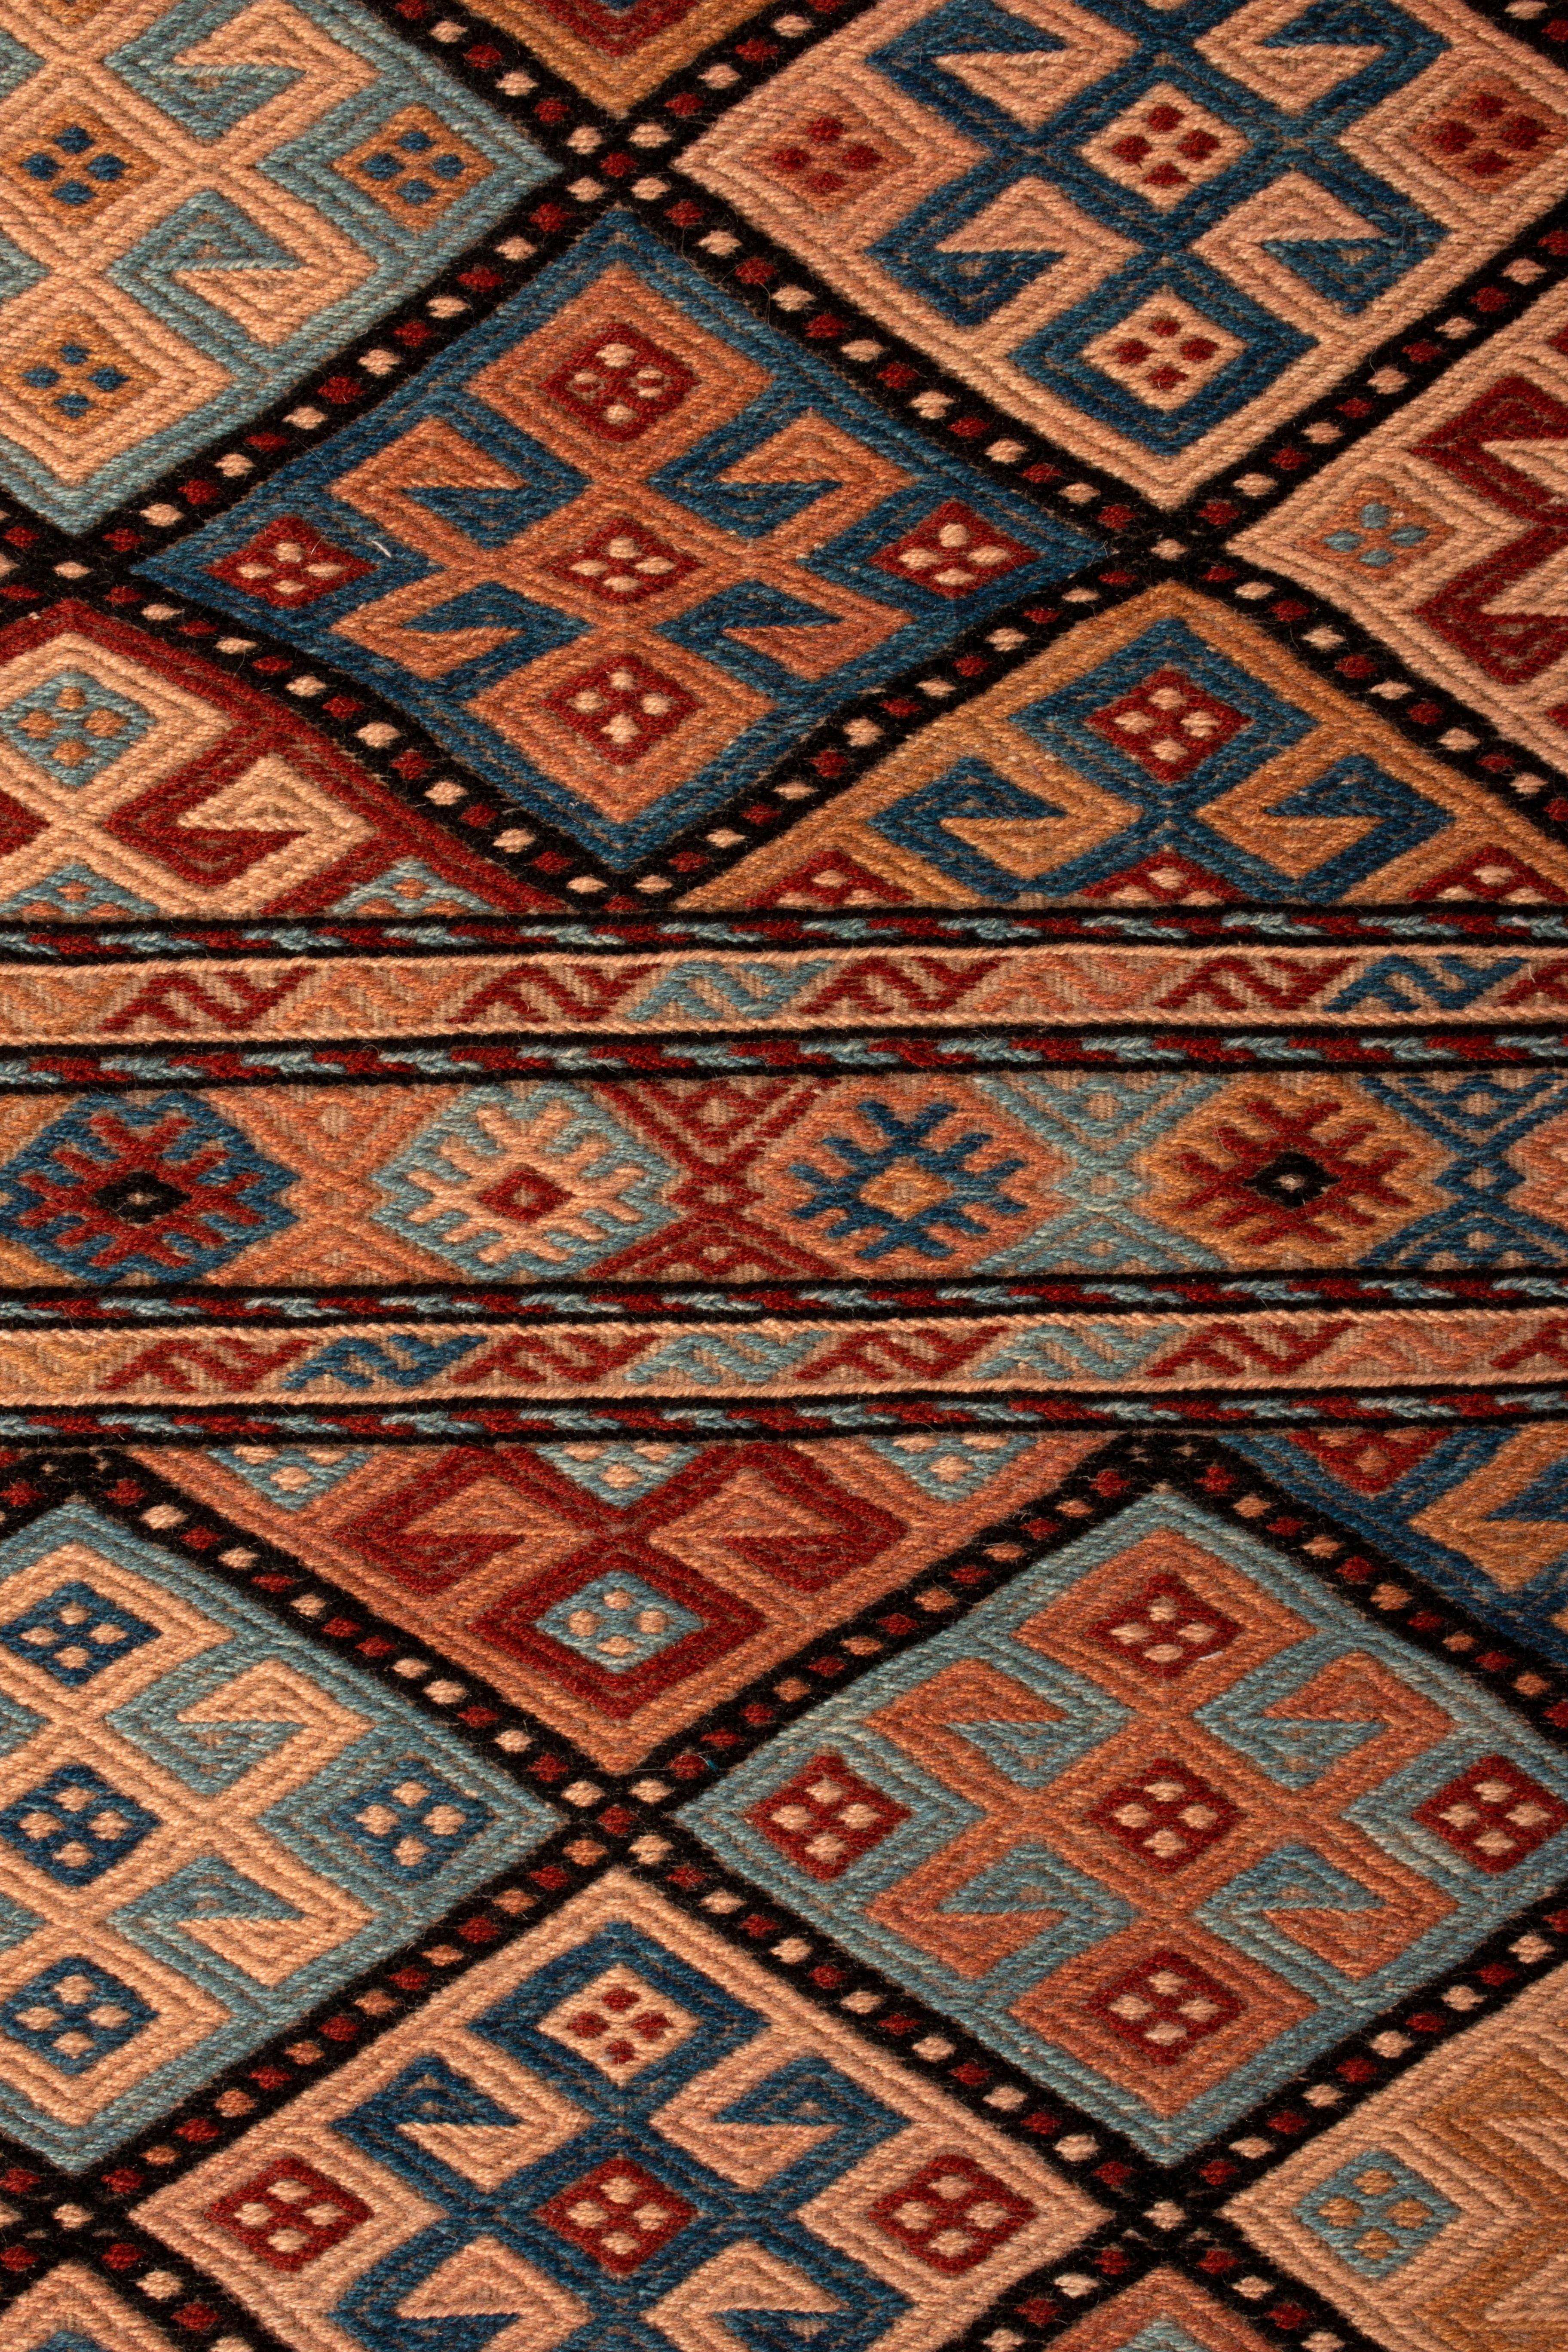 Wool Contemporary Harput-Style Kilim Blue Camel Geometric All-Over Flat-Weave Runner